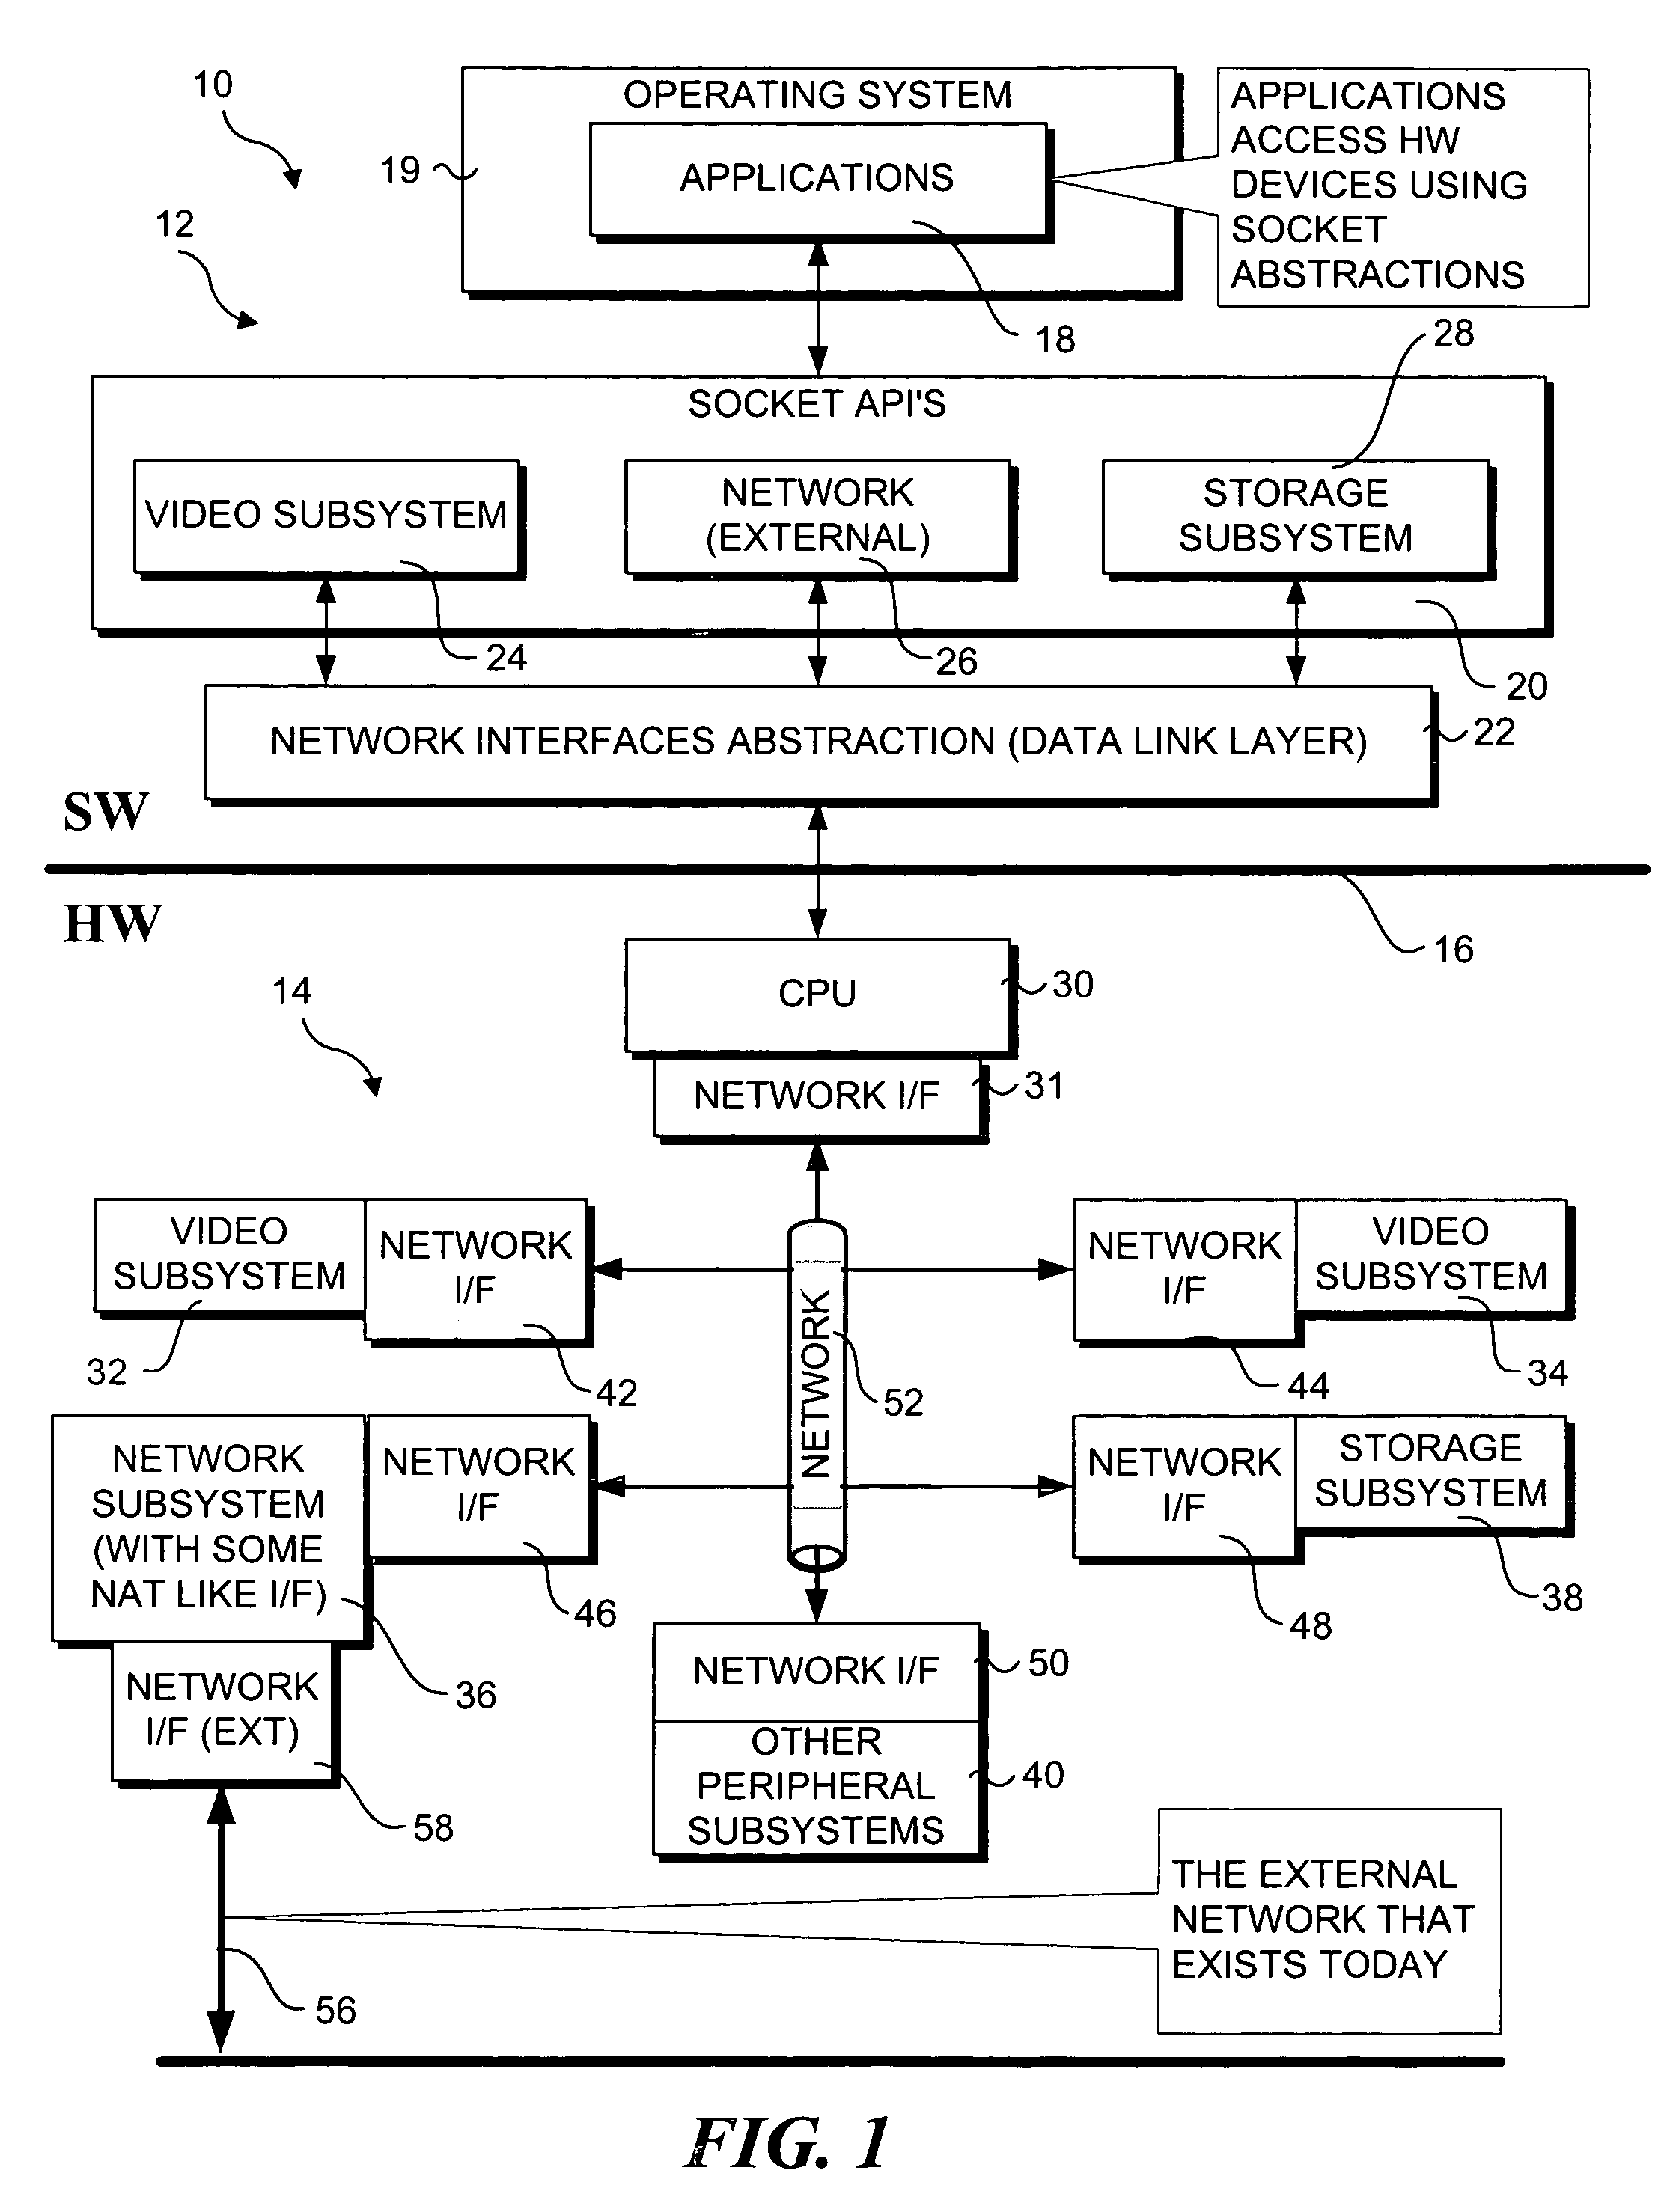 Network based intra-system communications architecture